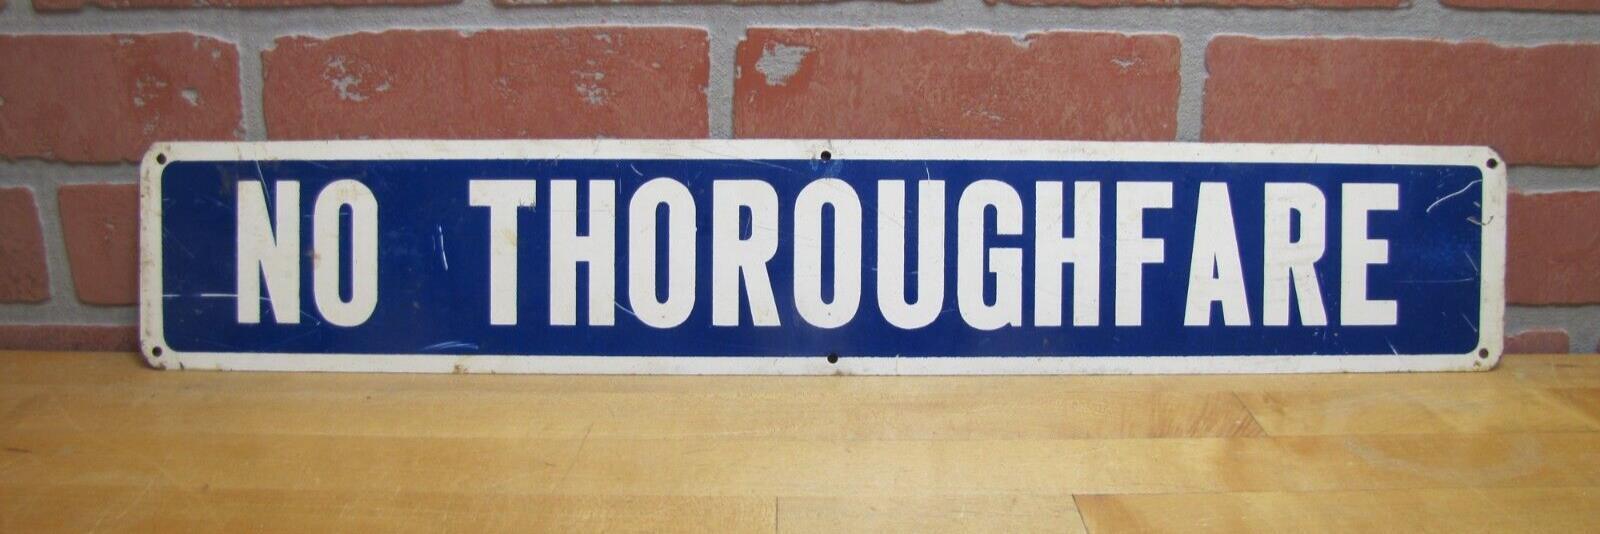 NO THOROUGHFARE Old Sign Industrial Shop Transportation Safety Metal Advertising